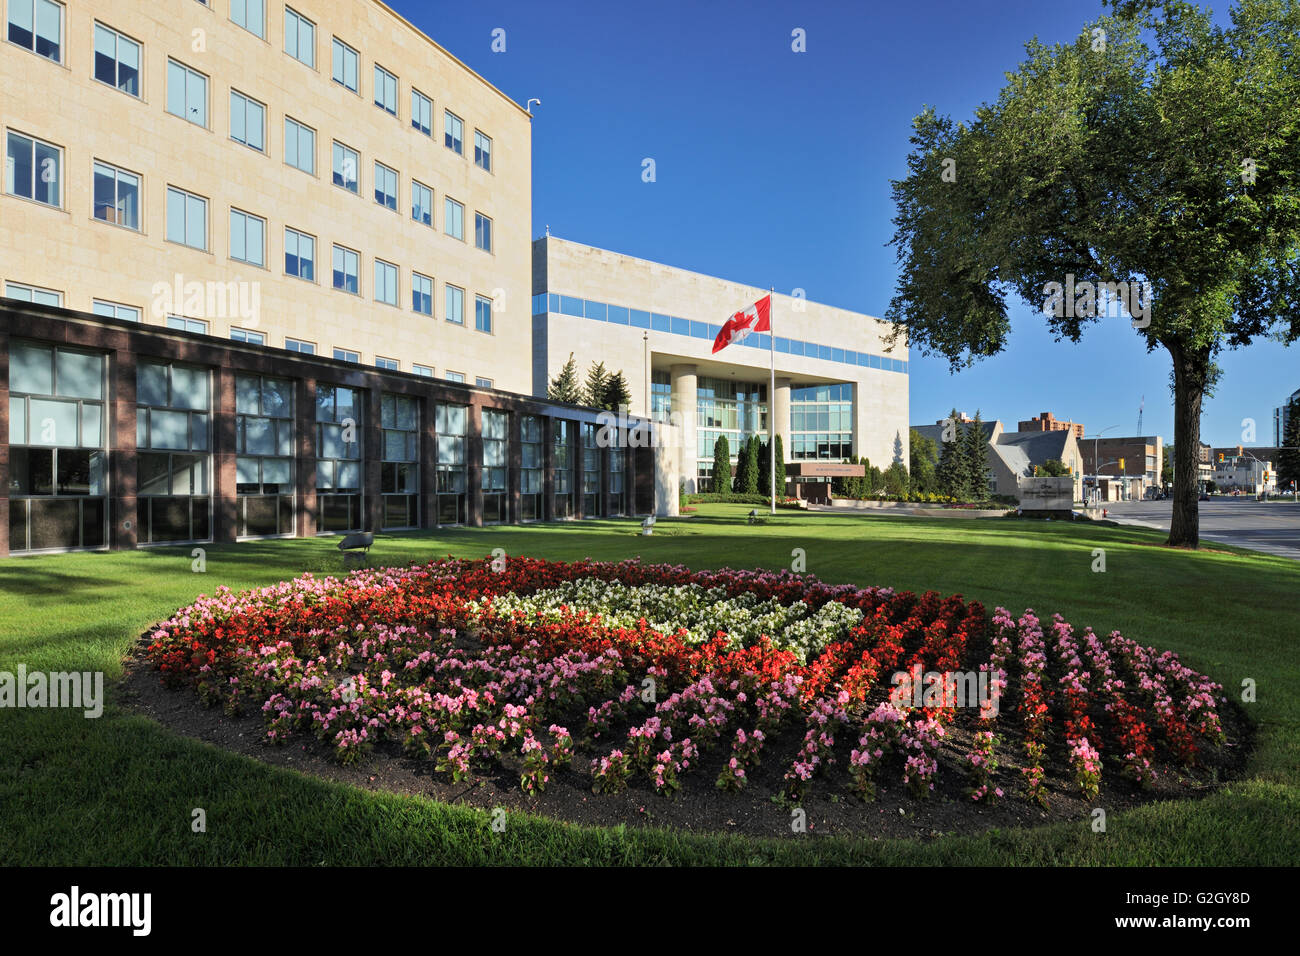 Great-West Life Assurance Co. (Head Office) with flower gardens Winnipeg Manitoba Canada Stock Photo